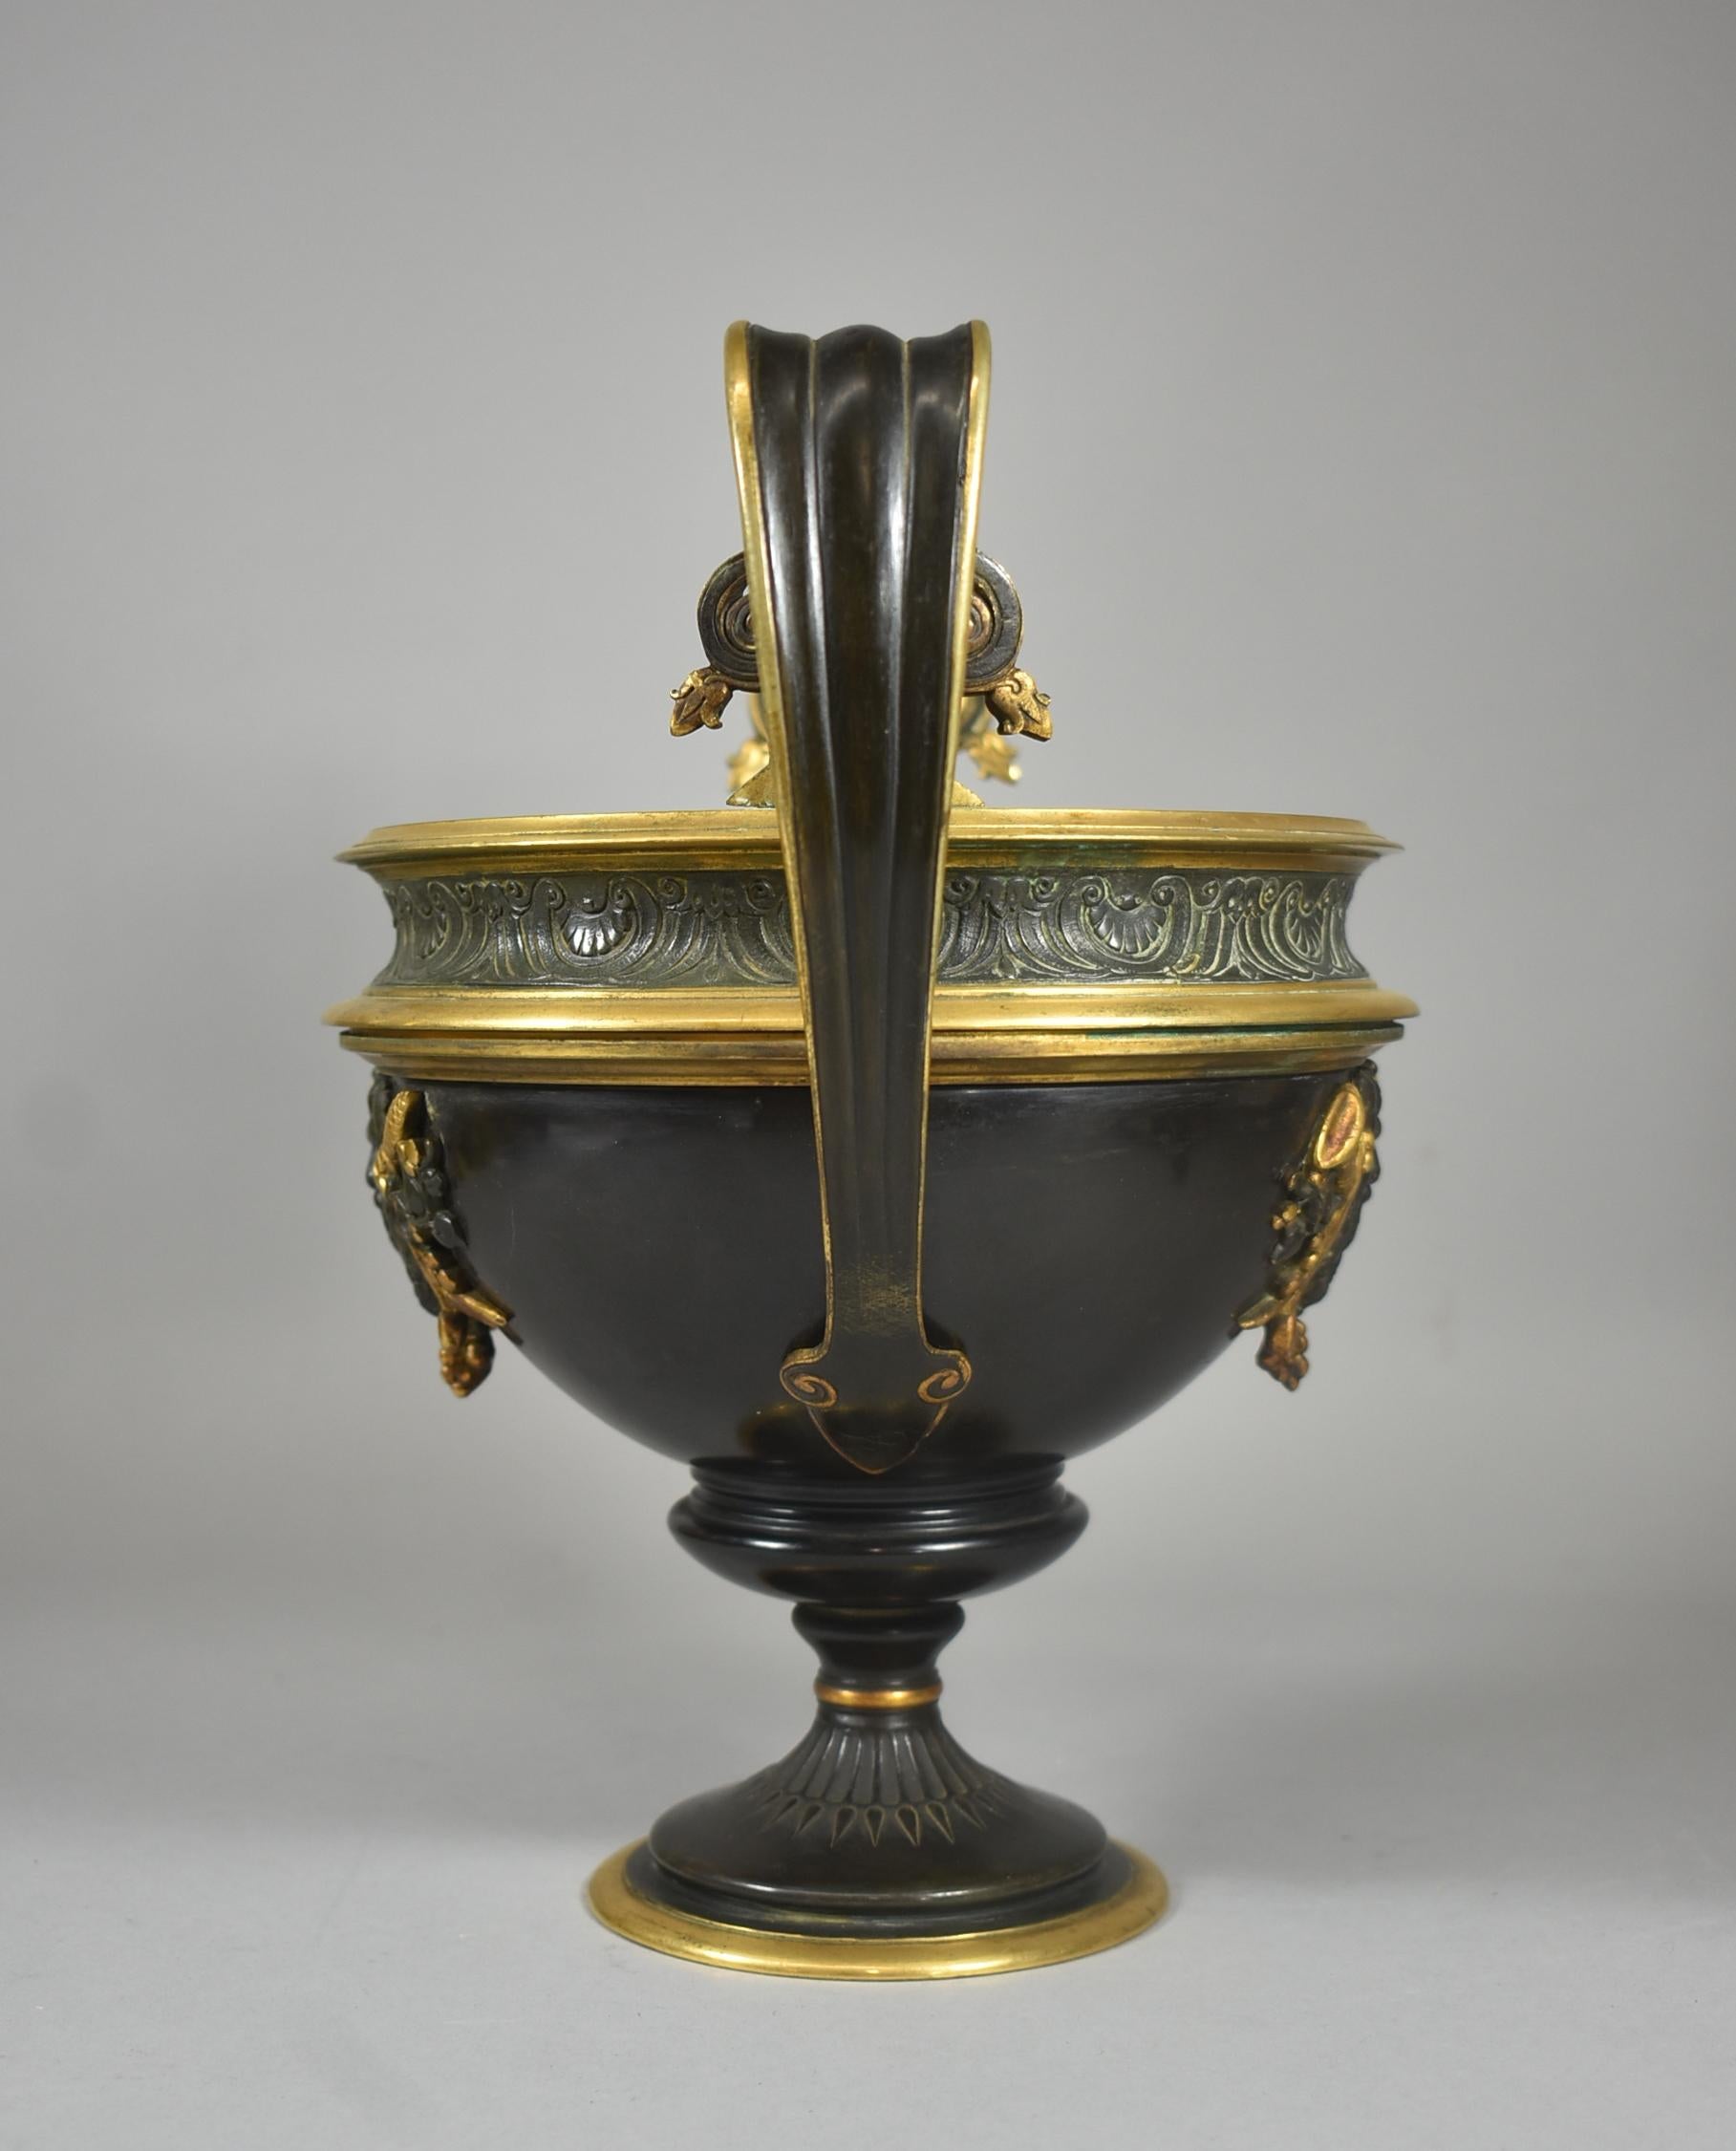 Brass two handled compote / urn centerpiece with figural center male face relief surrounded by grapes, horns and pinecones.